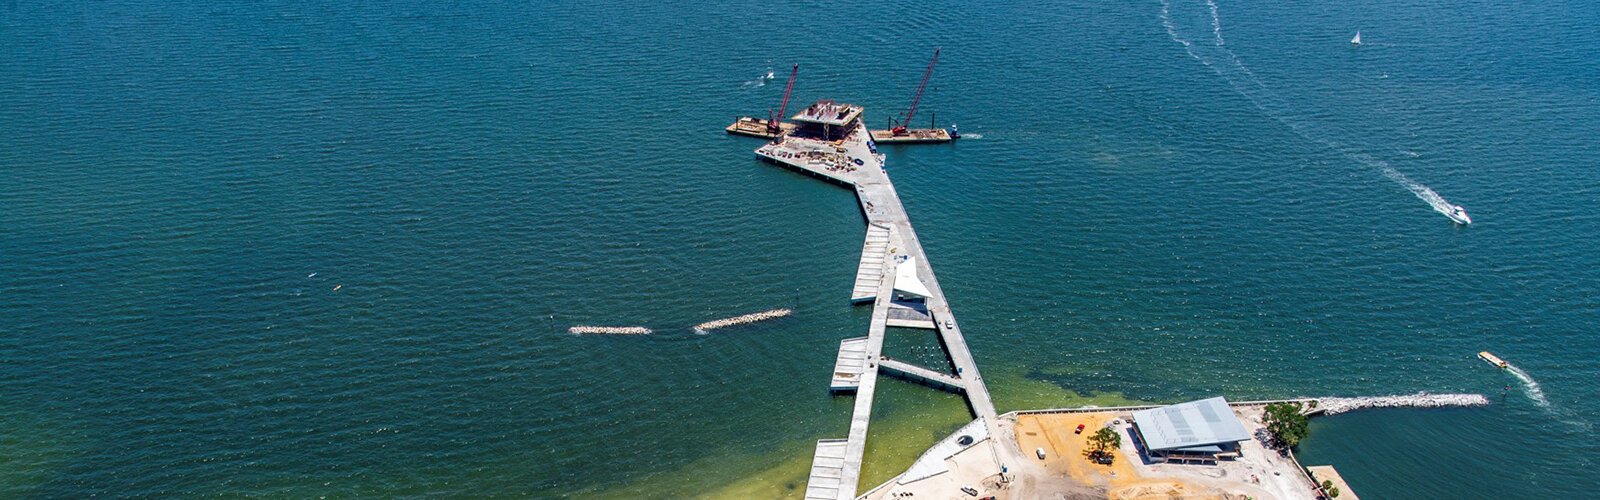 Overview of the St. Pete Pier construction from May 2019.